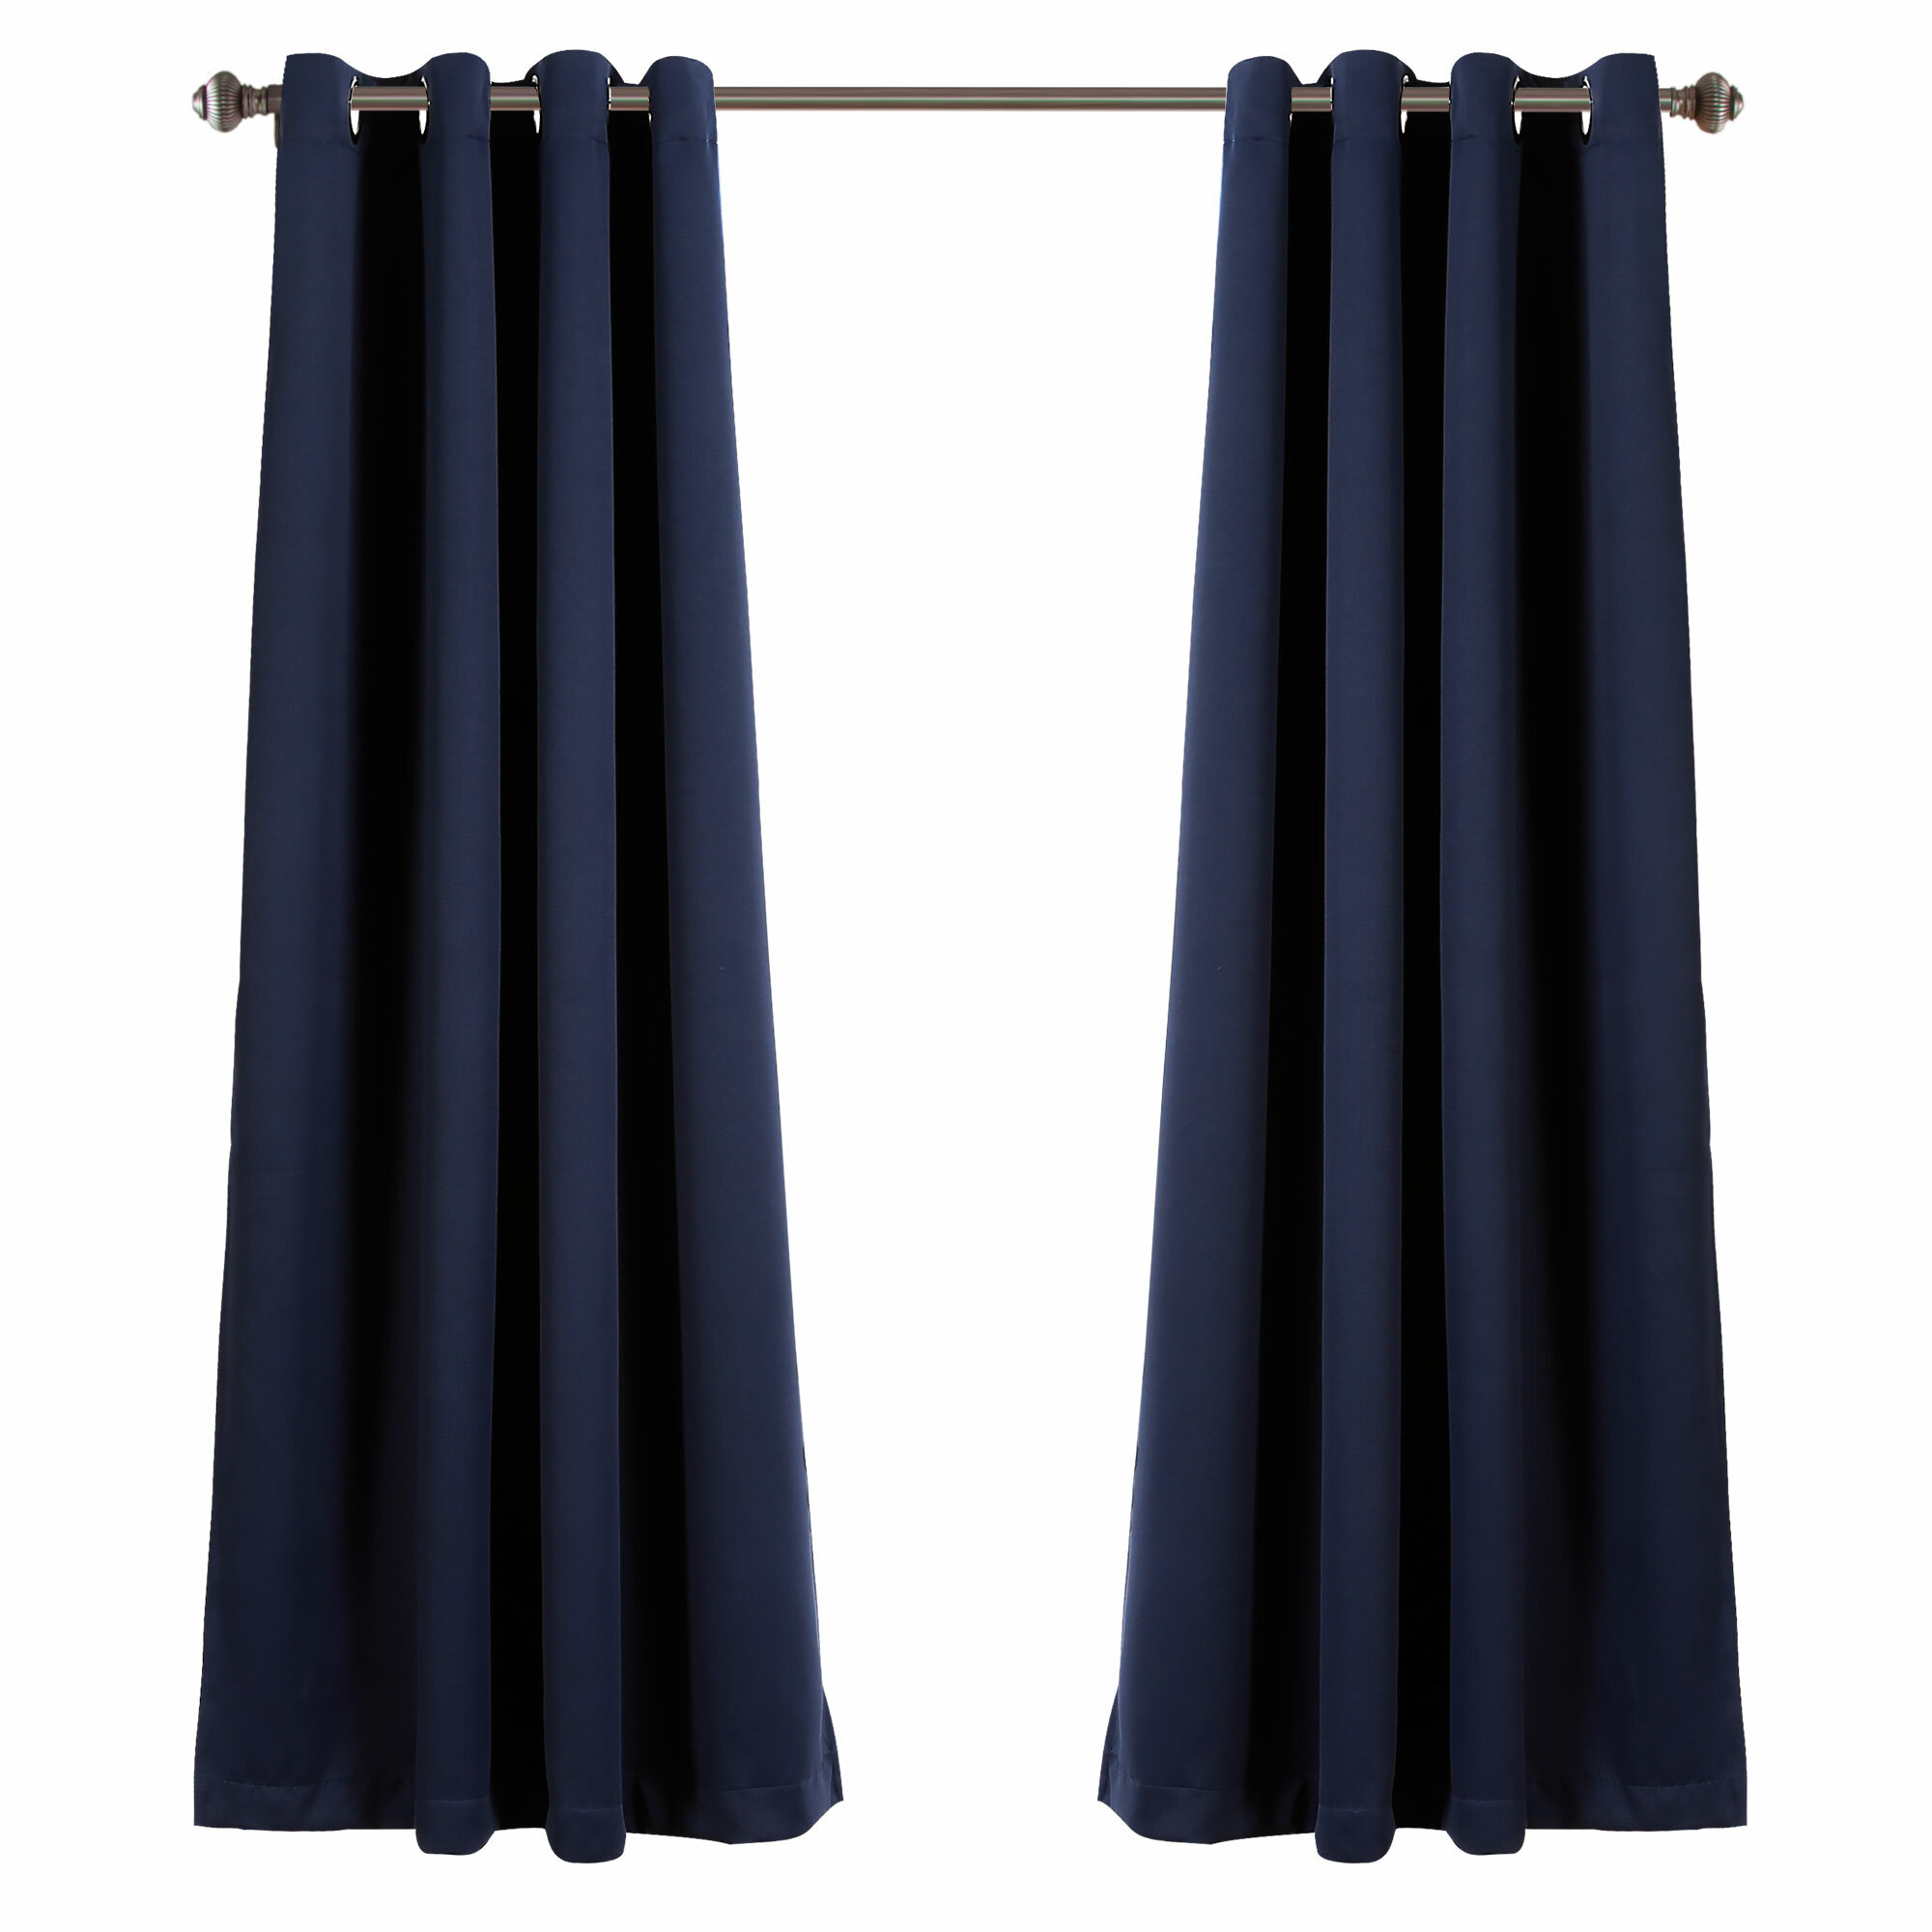 EID NAVY TEAL Insulated Lined Blackout Grommet Window Curtain Panel PAIR 